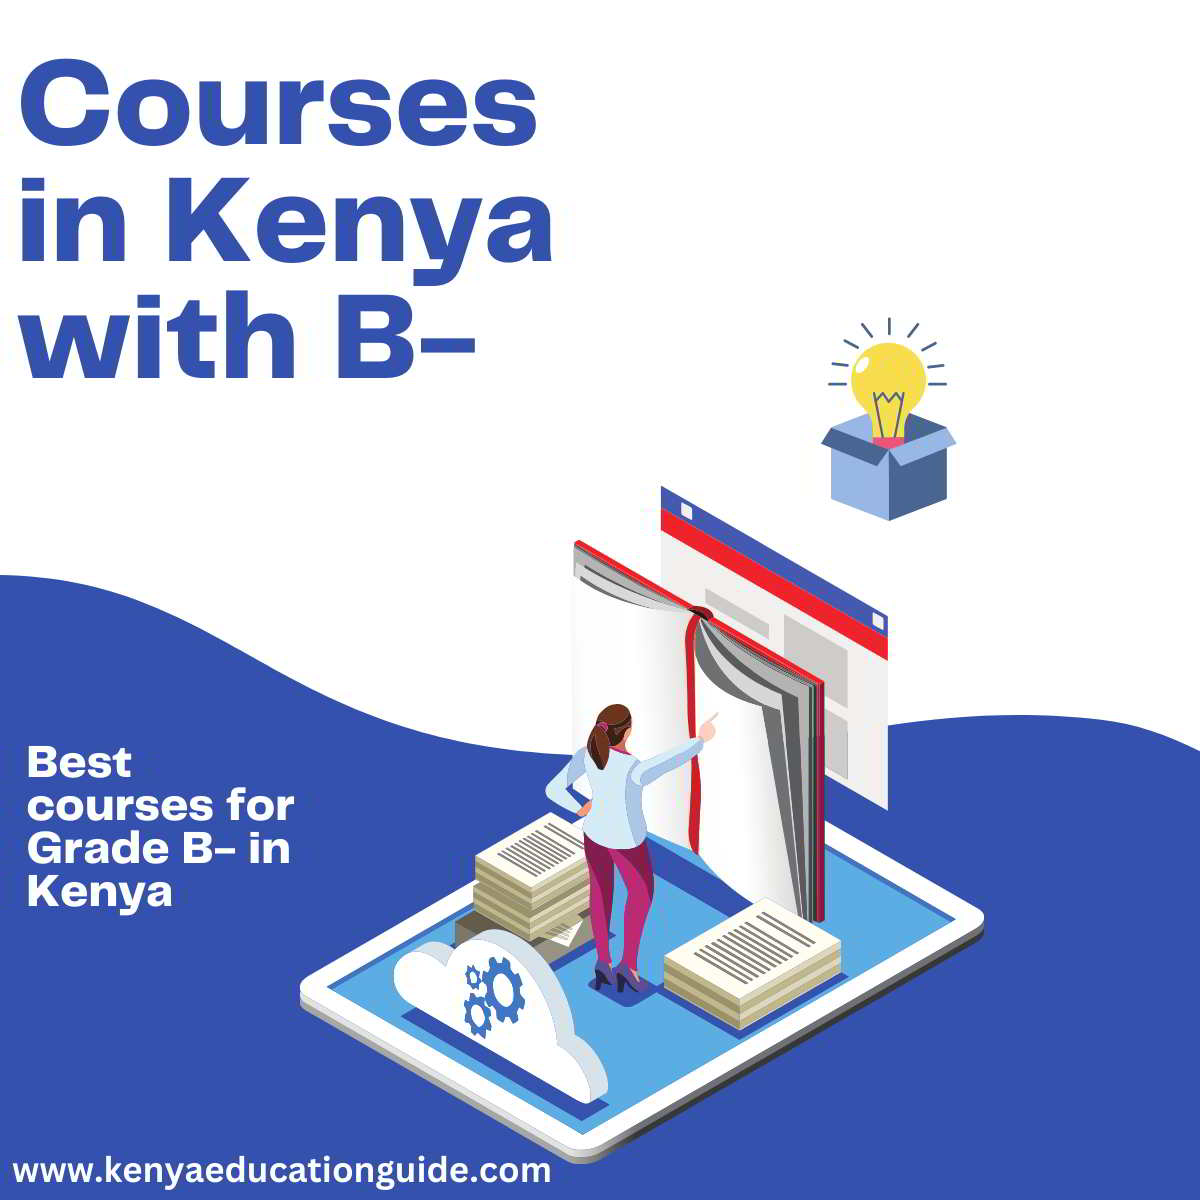 Courses in Kenya with B-